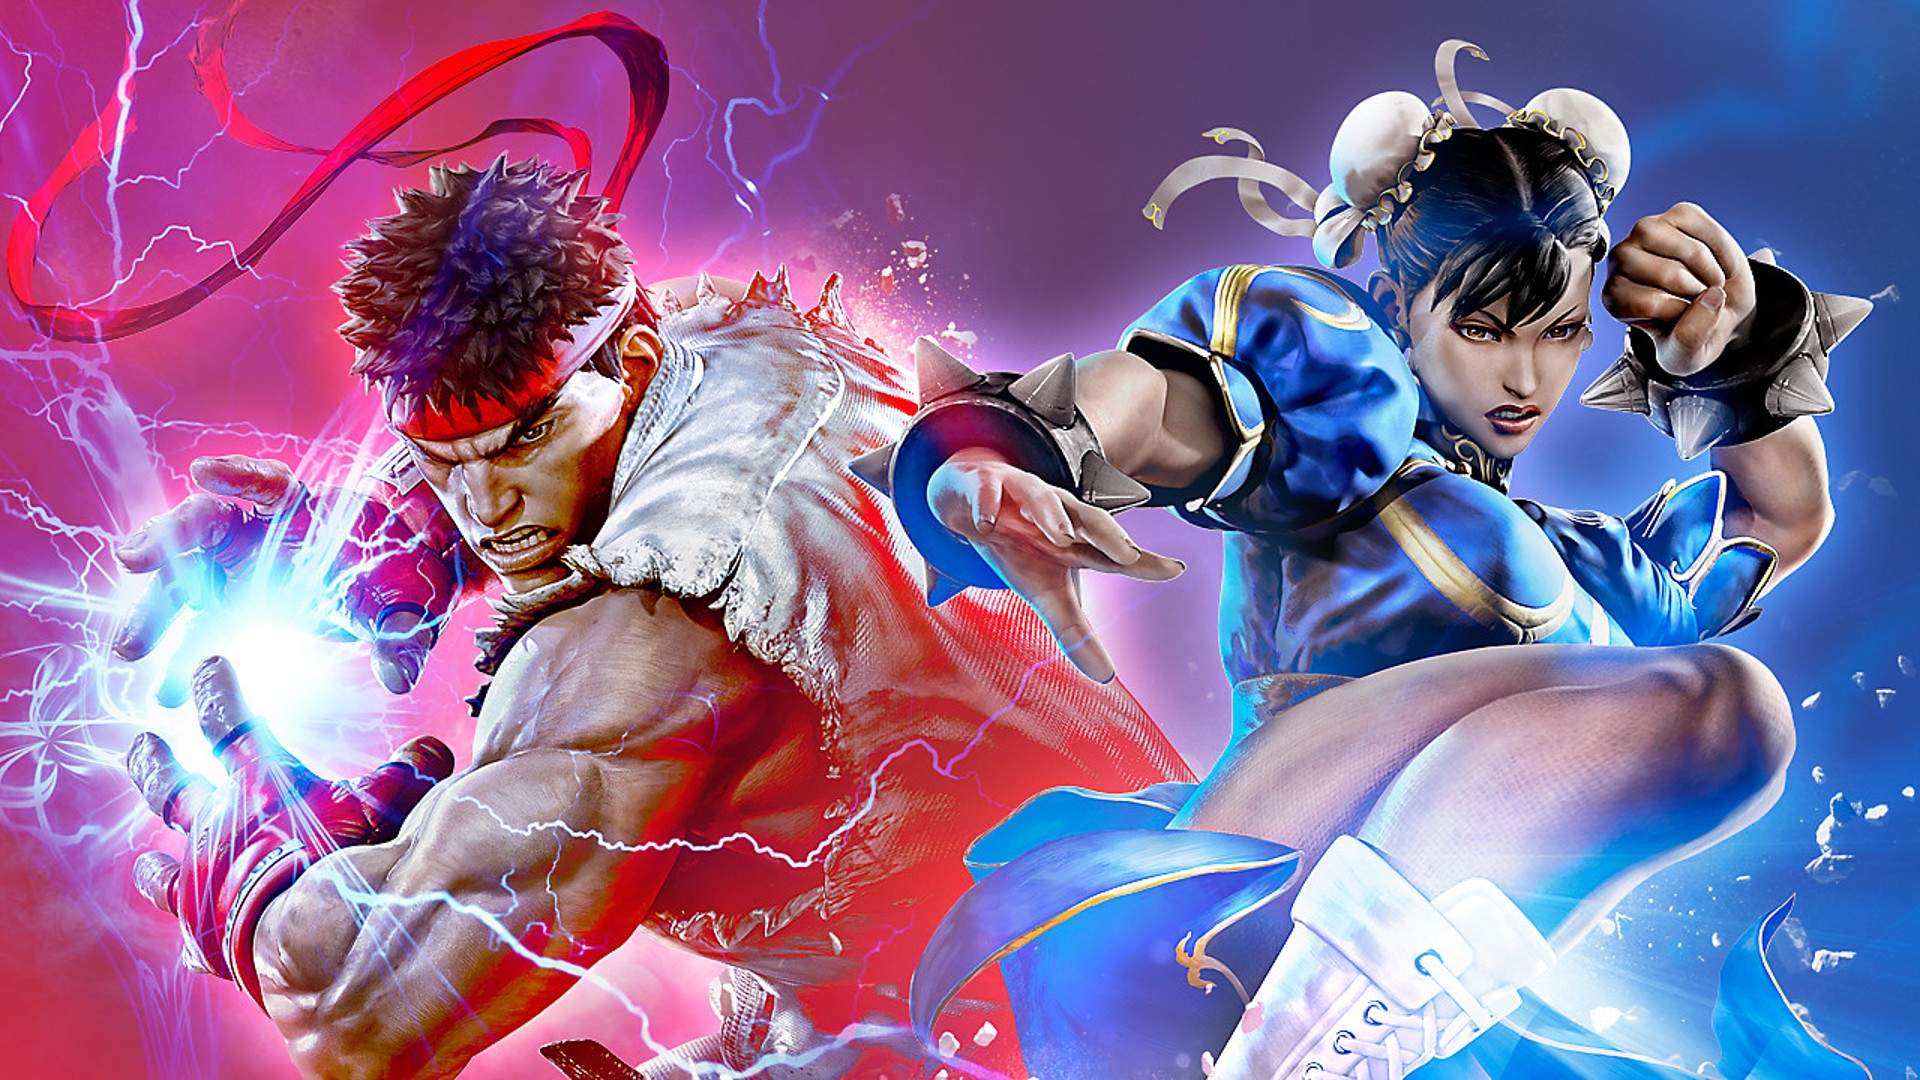 Street Fighter 5 finally surpasses its predecessor's sales numbers  unless you count in all of Street Fighter 4's expansions of course